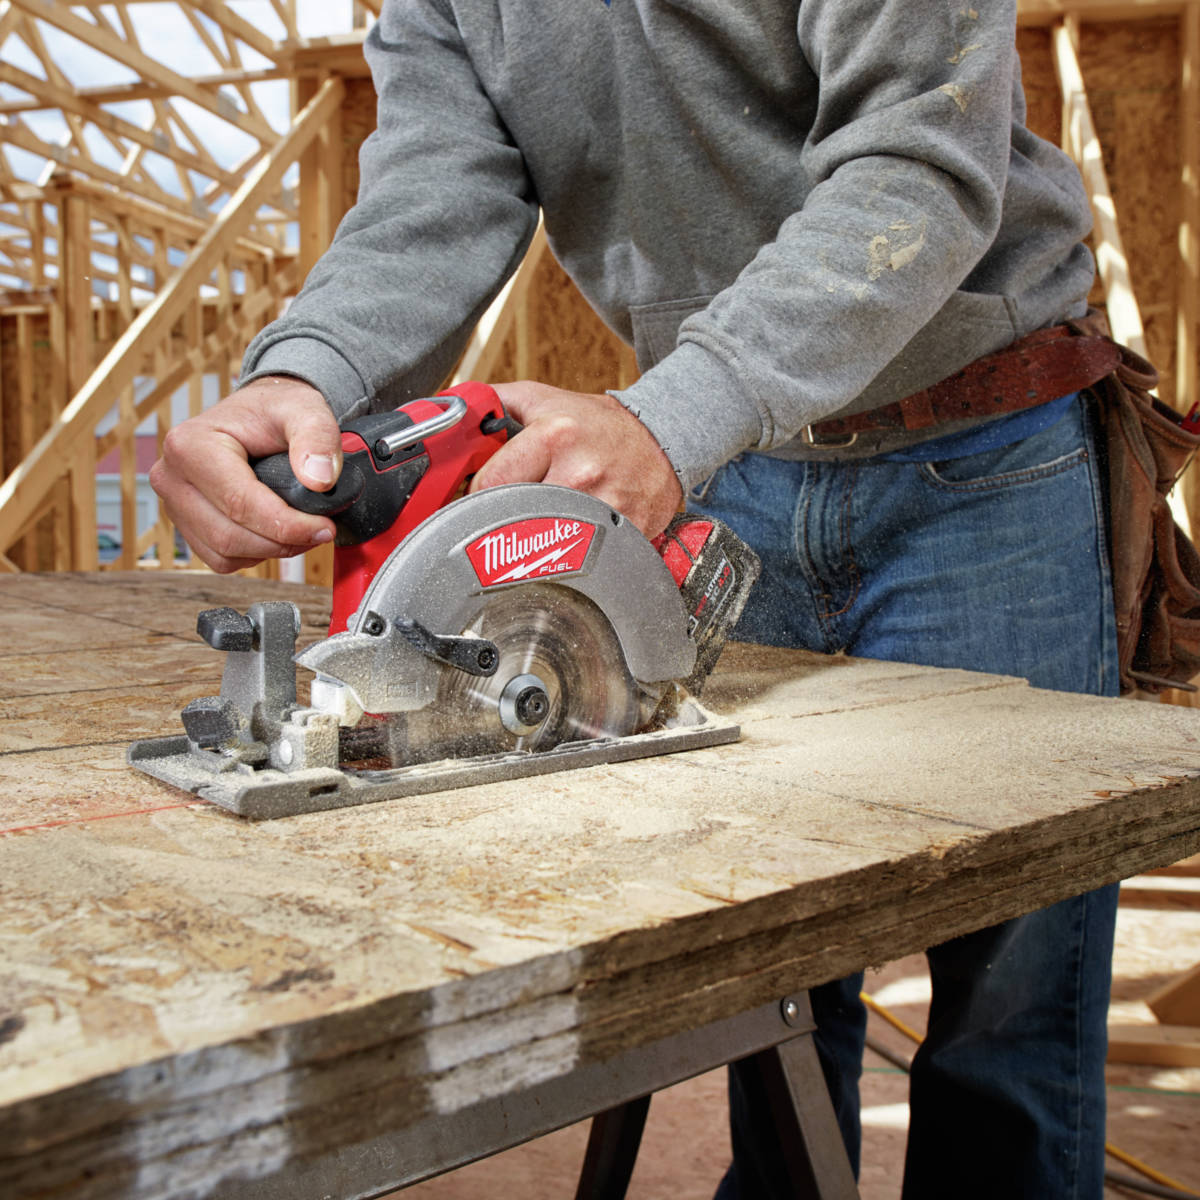 M18 FUEL 6-1/2 in. Circular Saw outpowers all other 18-Volt cordless circular saws